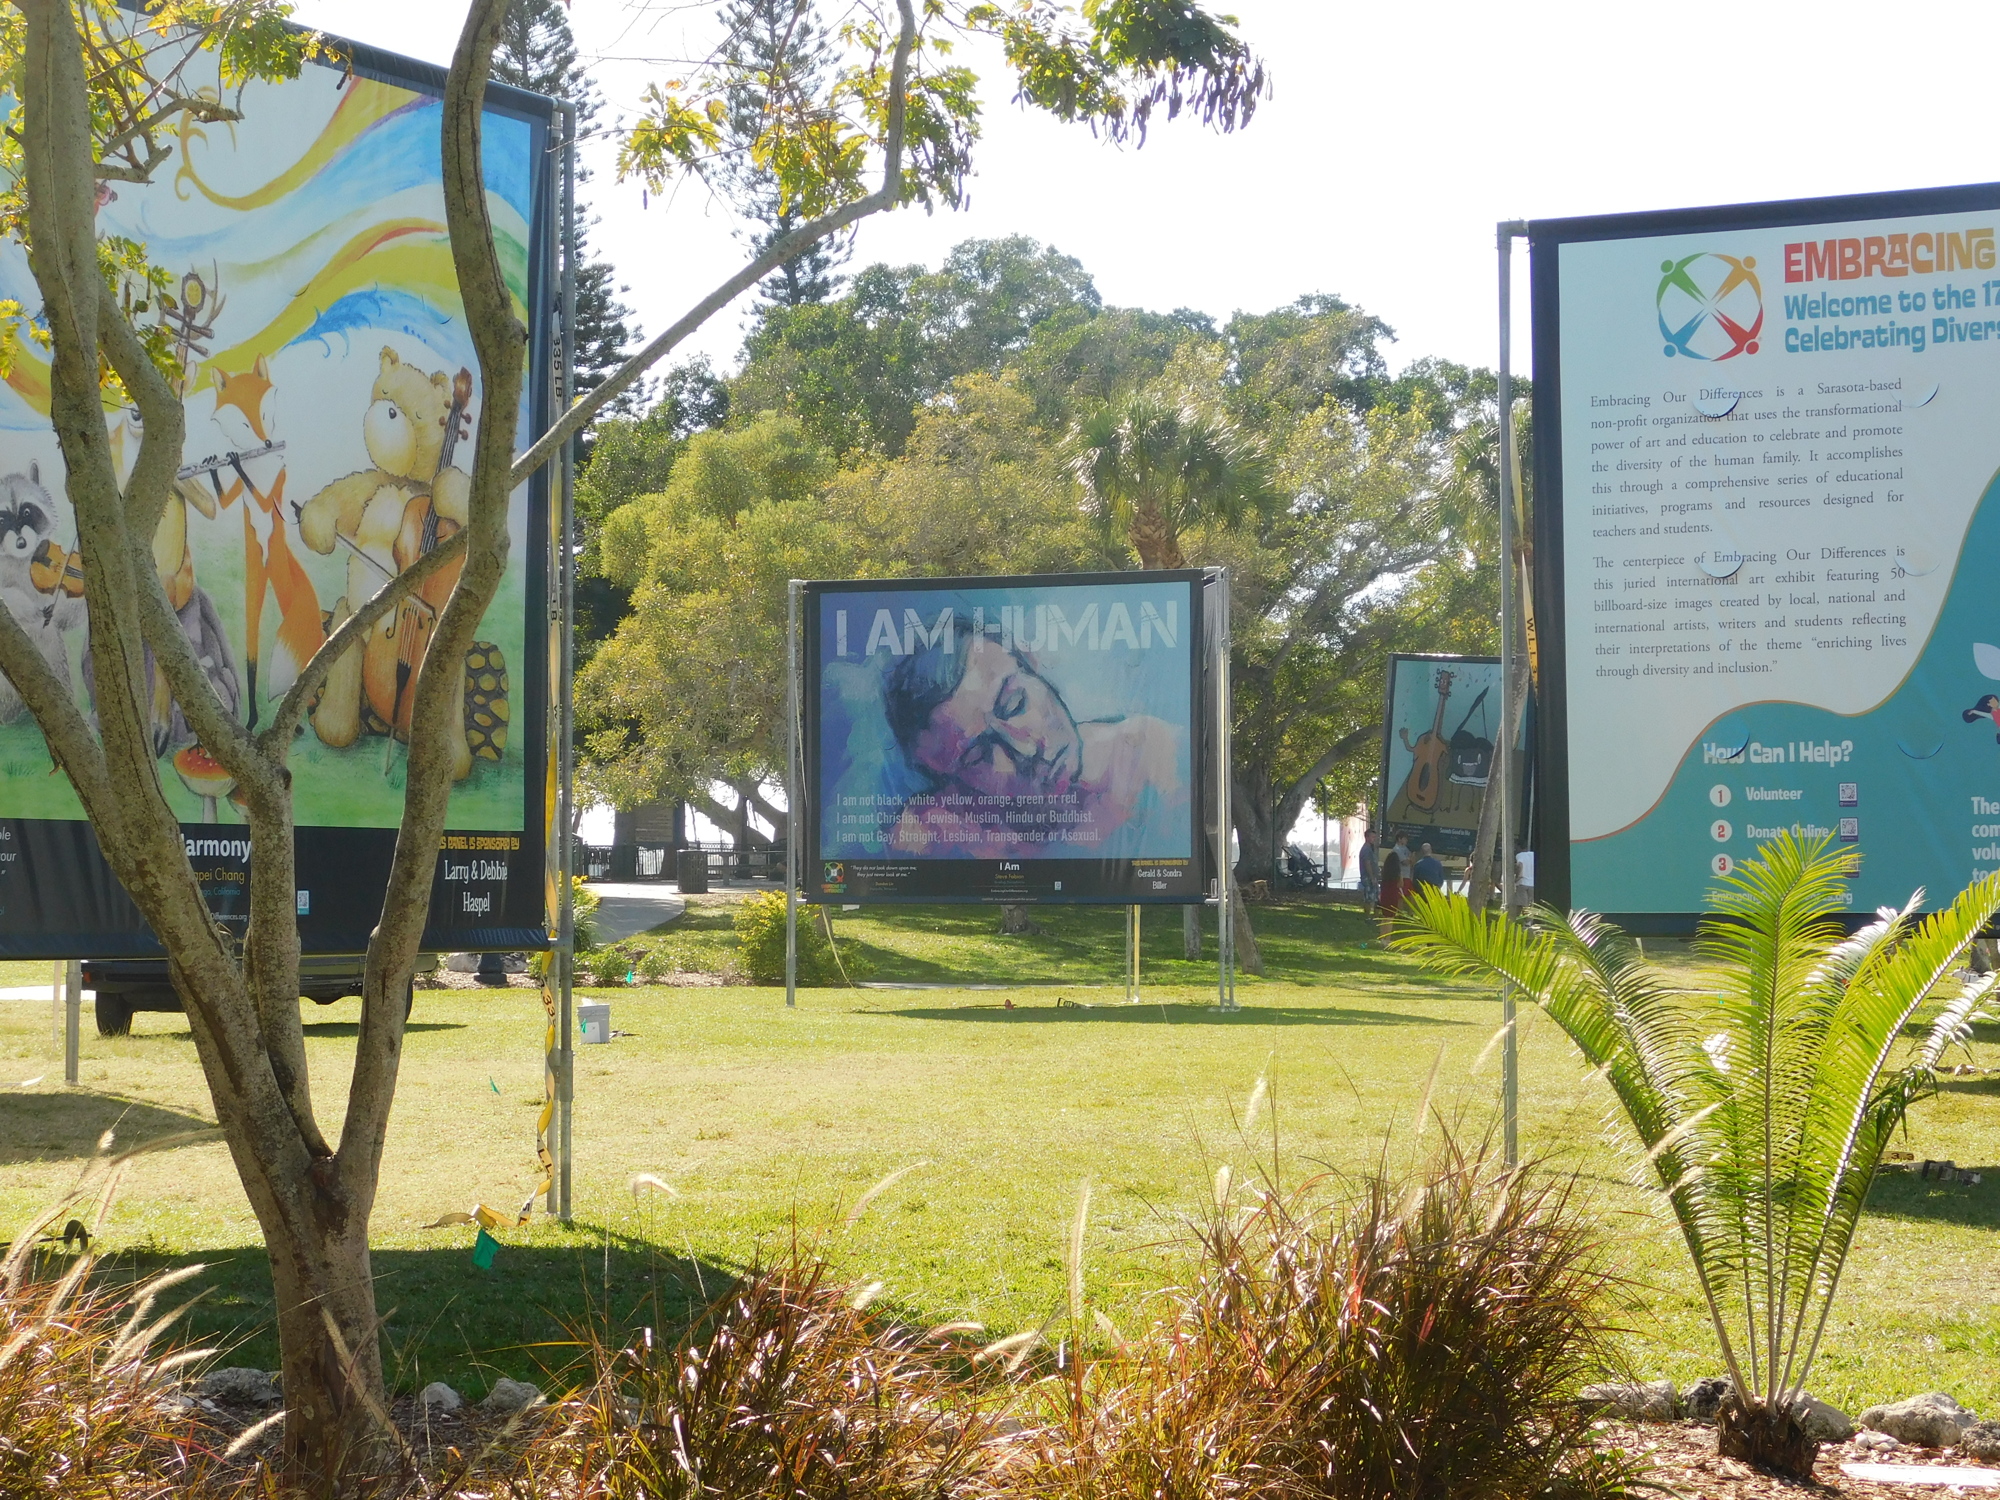 While the 12.5-by-16-foot images don't blend into the Bayfront Park landscape, they also fit in during their stay.